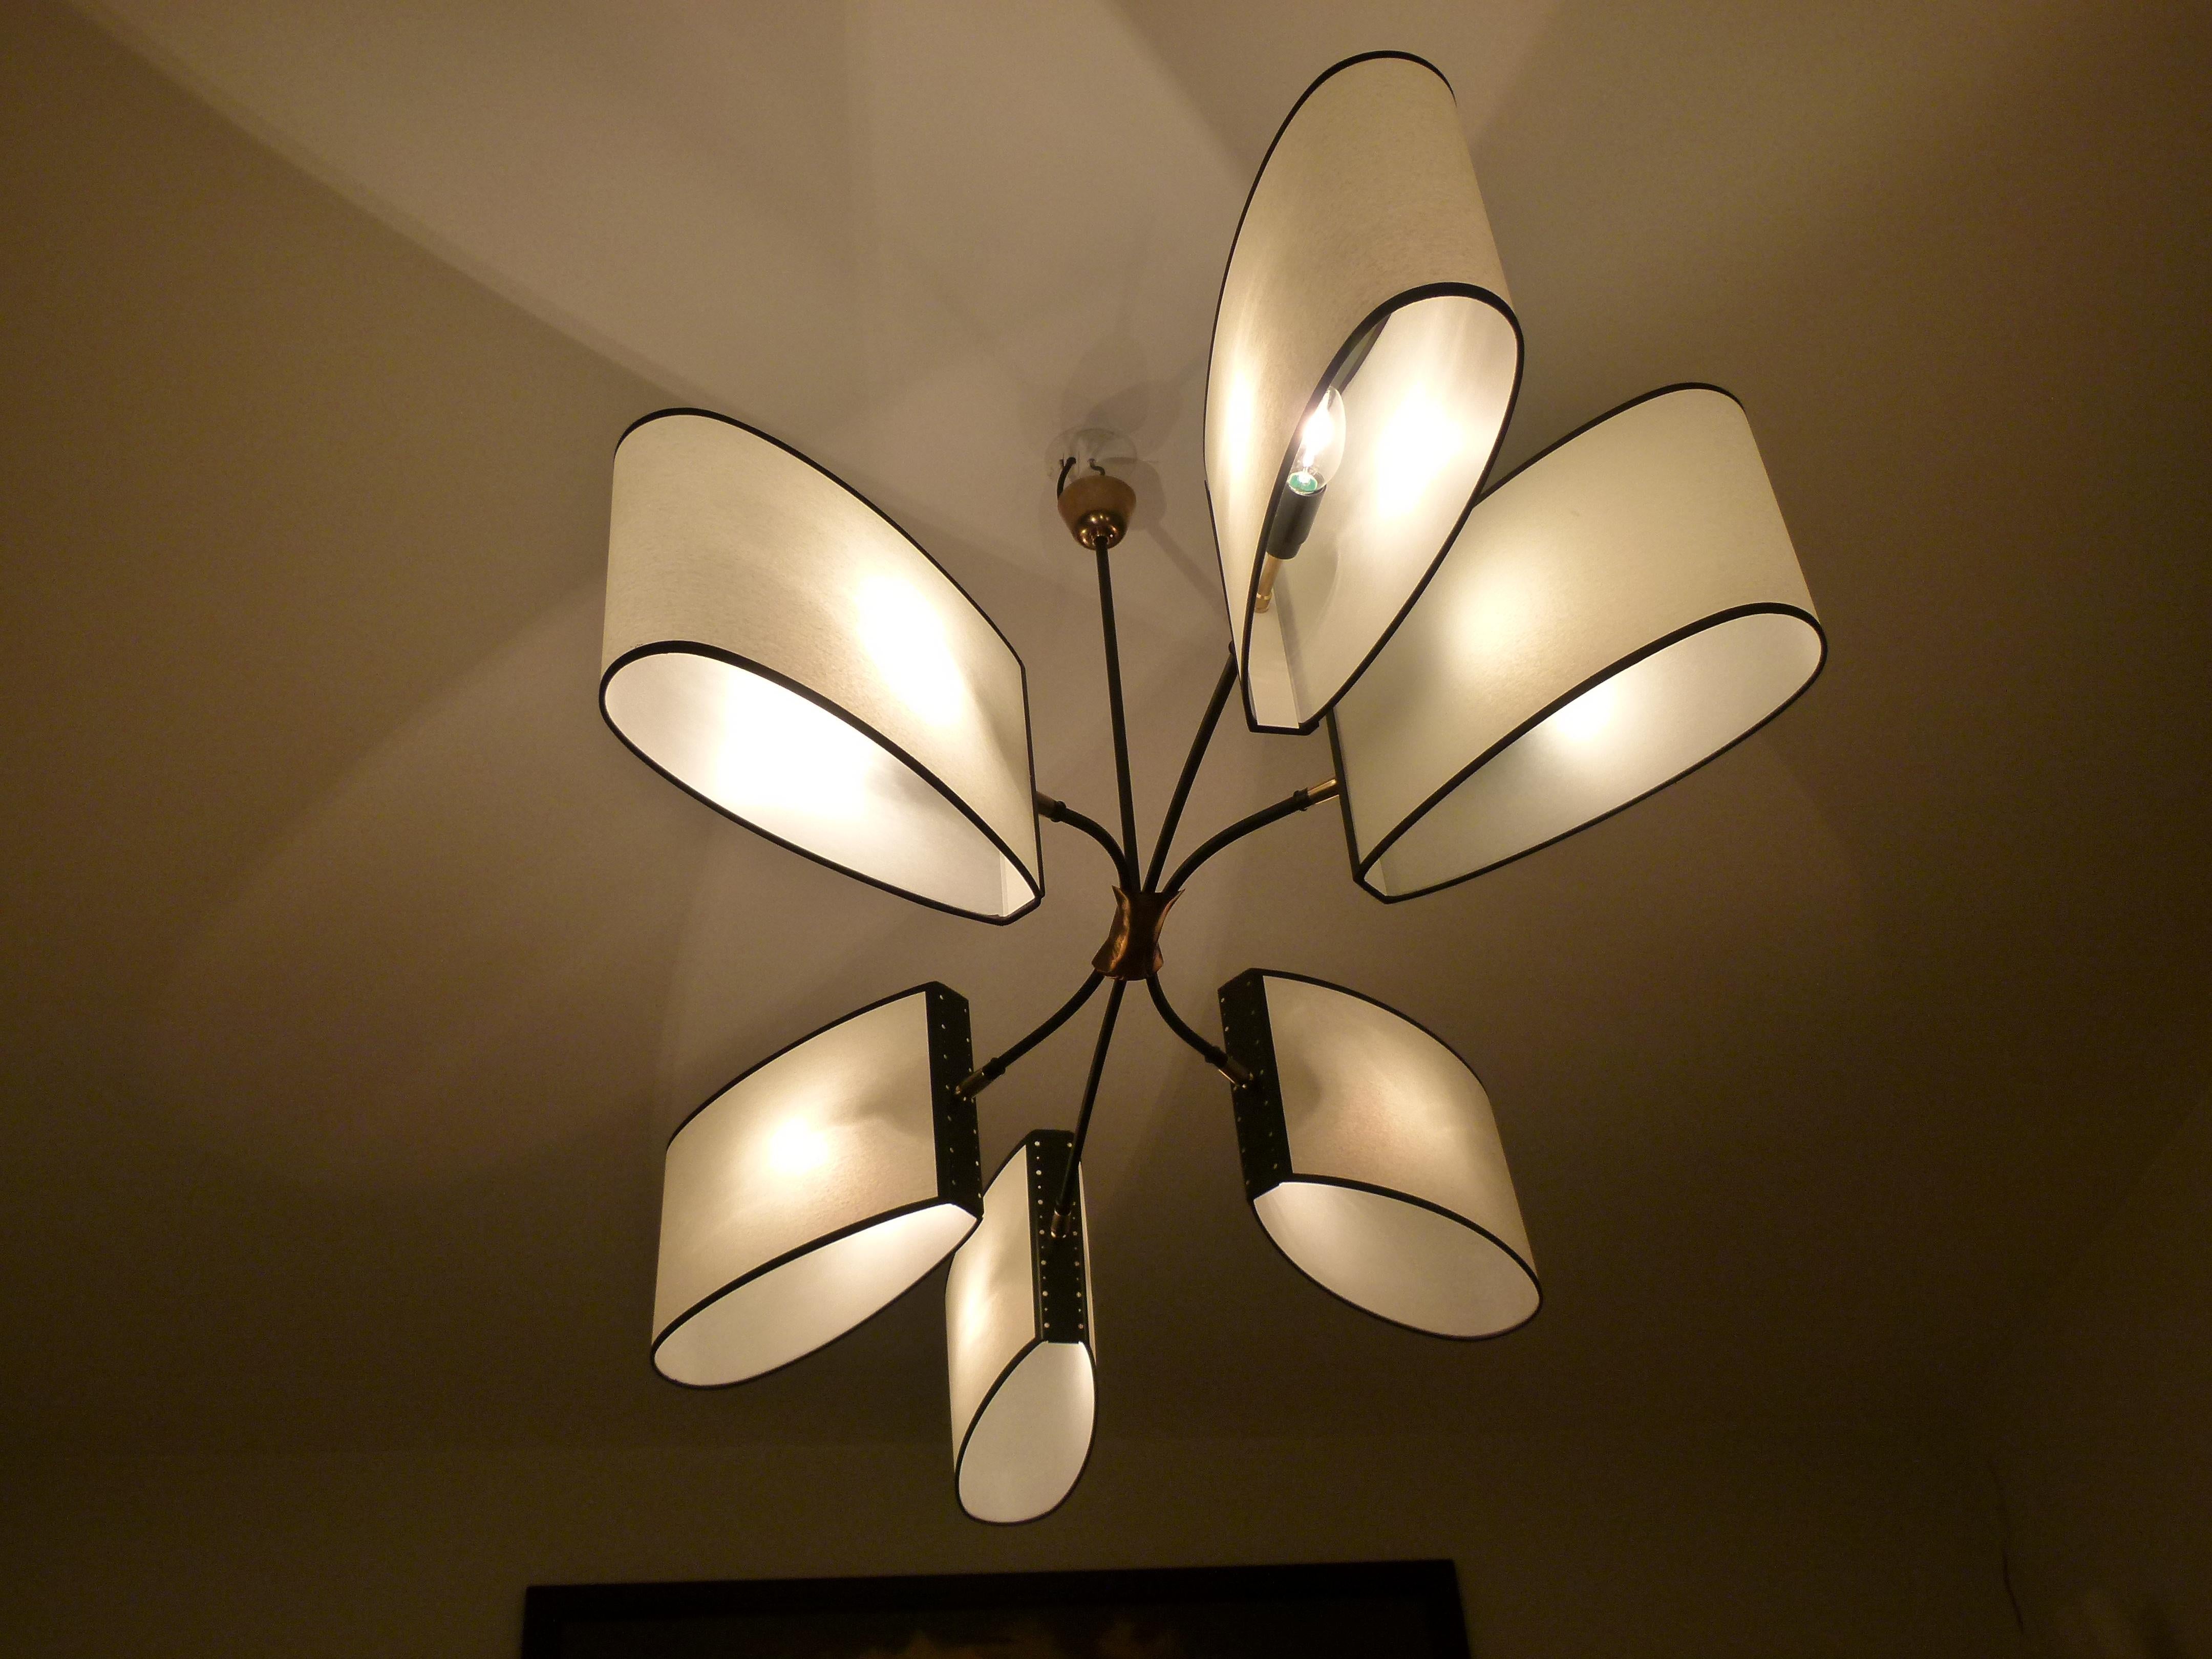 20th Century Asymmetrical chandelier with six lighted arms by Maison Lunel, circa 1950